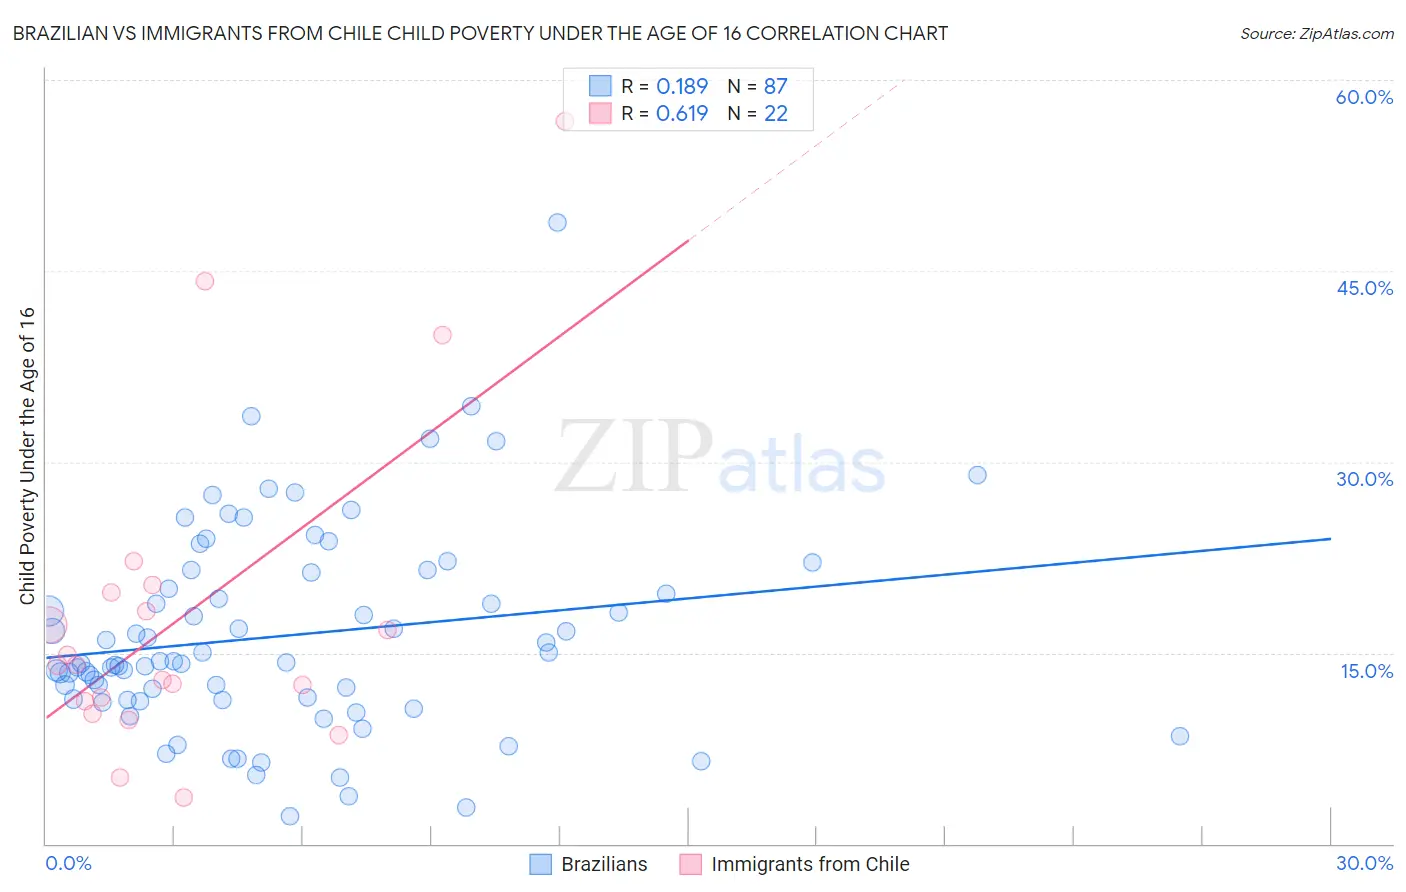 Brazilian vs Immigrants from Chile Child Poverty Under the Age of 16